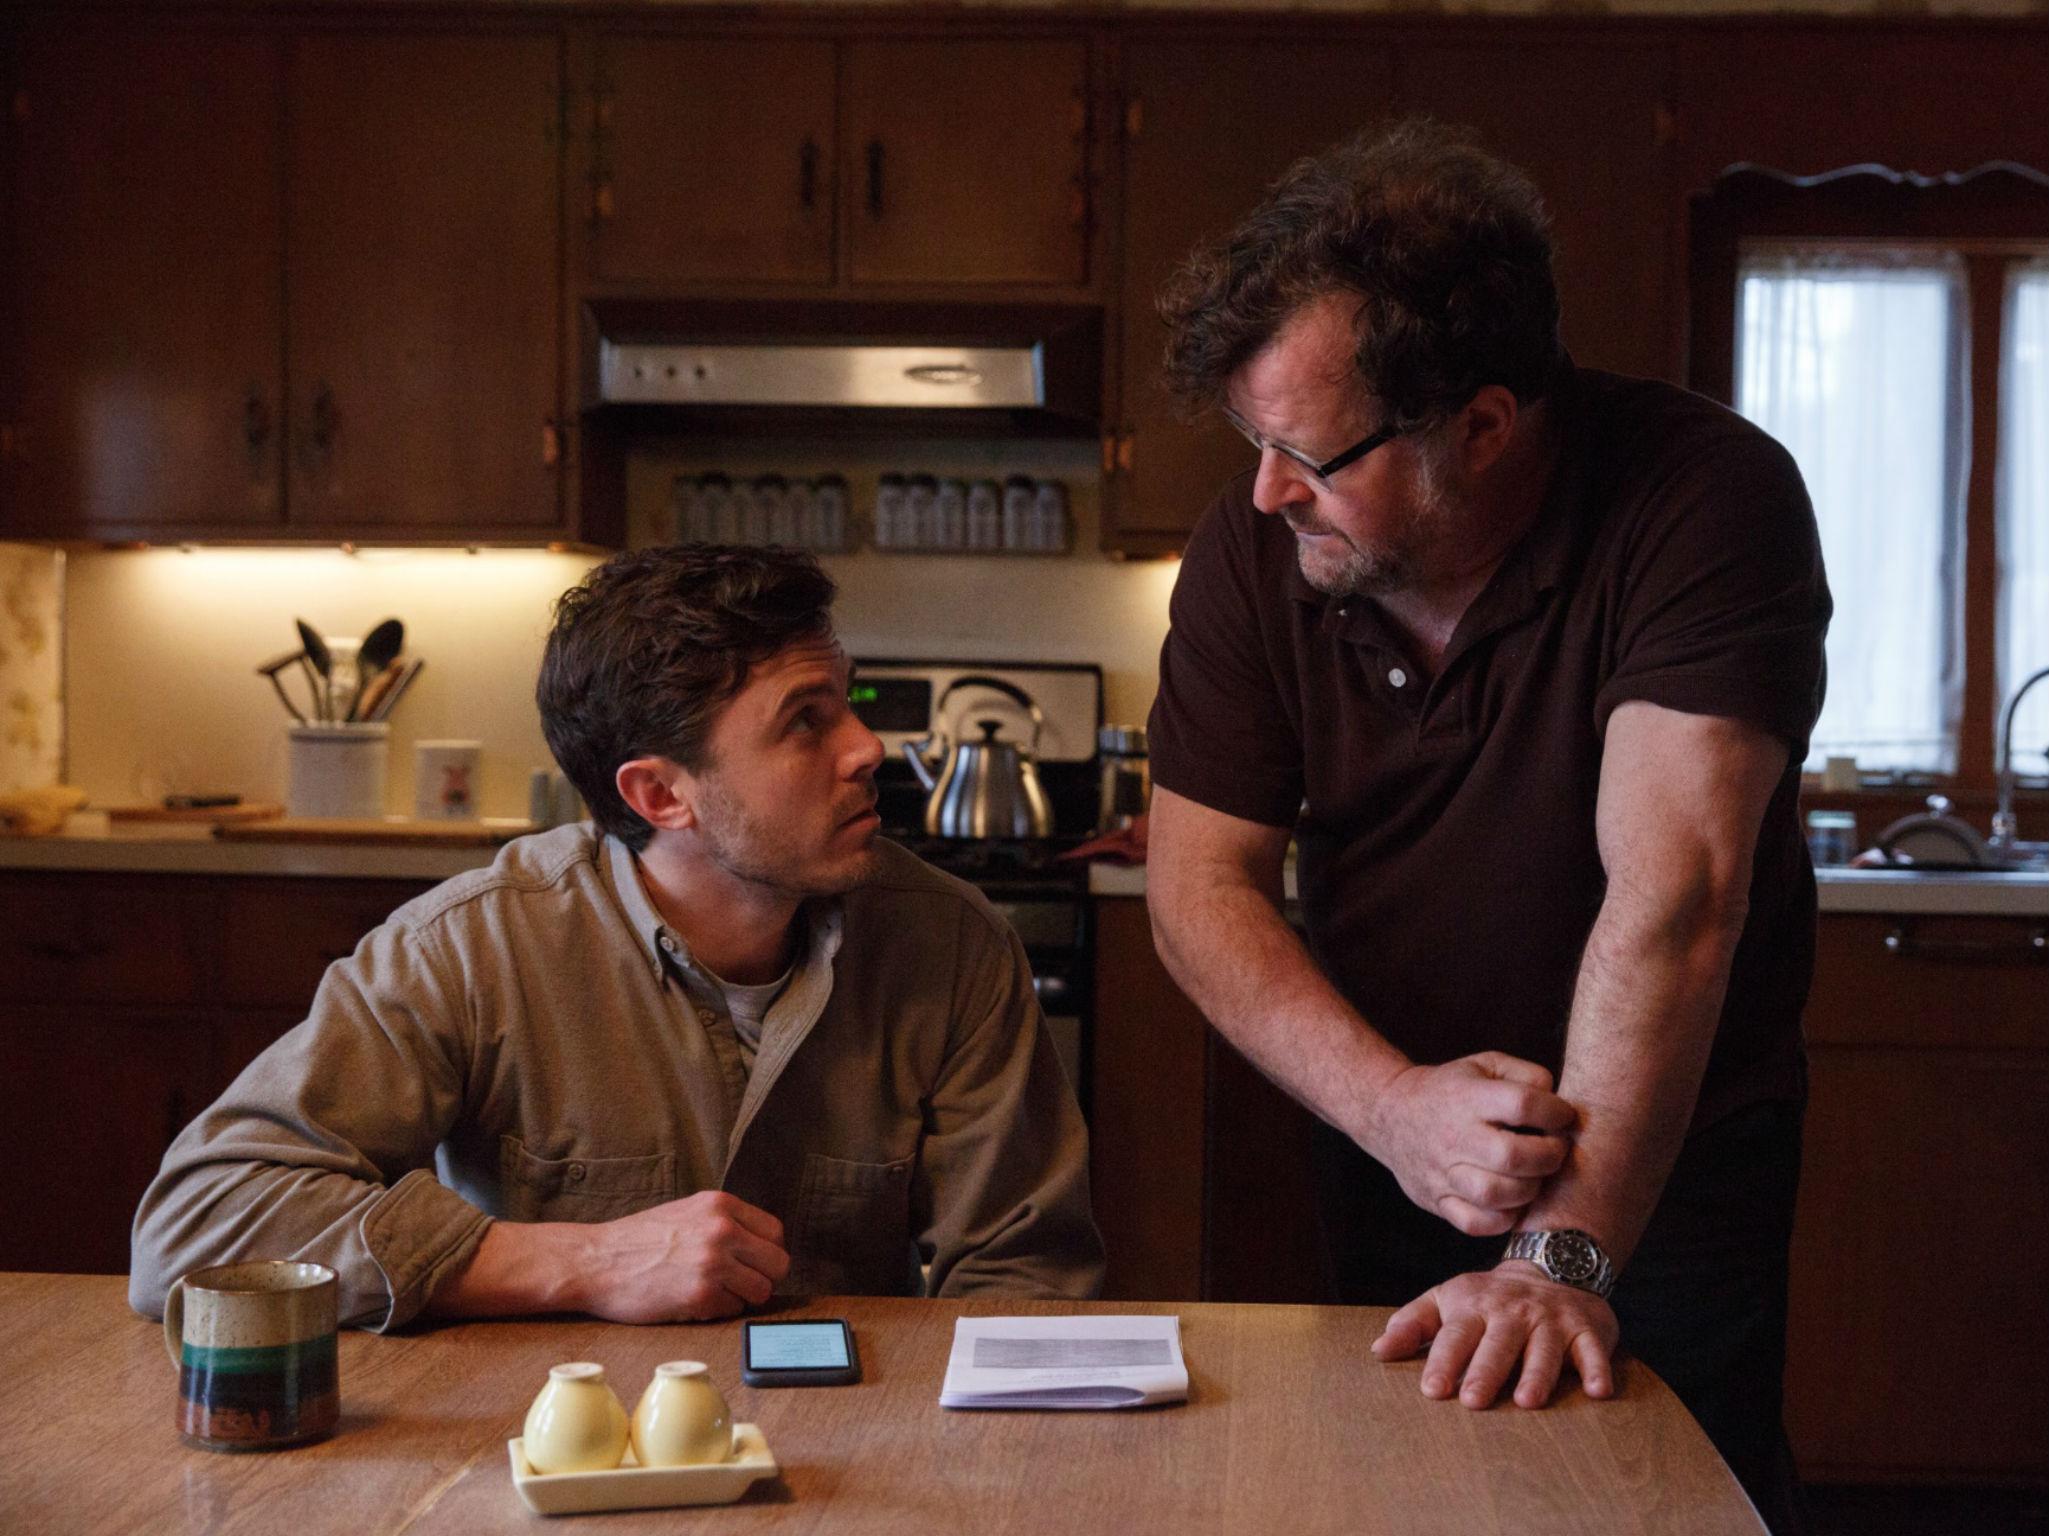 ‘Manchester By The Sea’ director Kenneth Lonergan (right) behind the scenes with the film’s star Casey Affleck